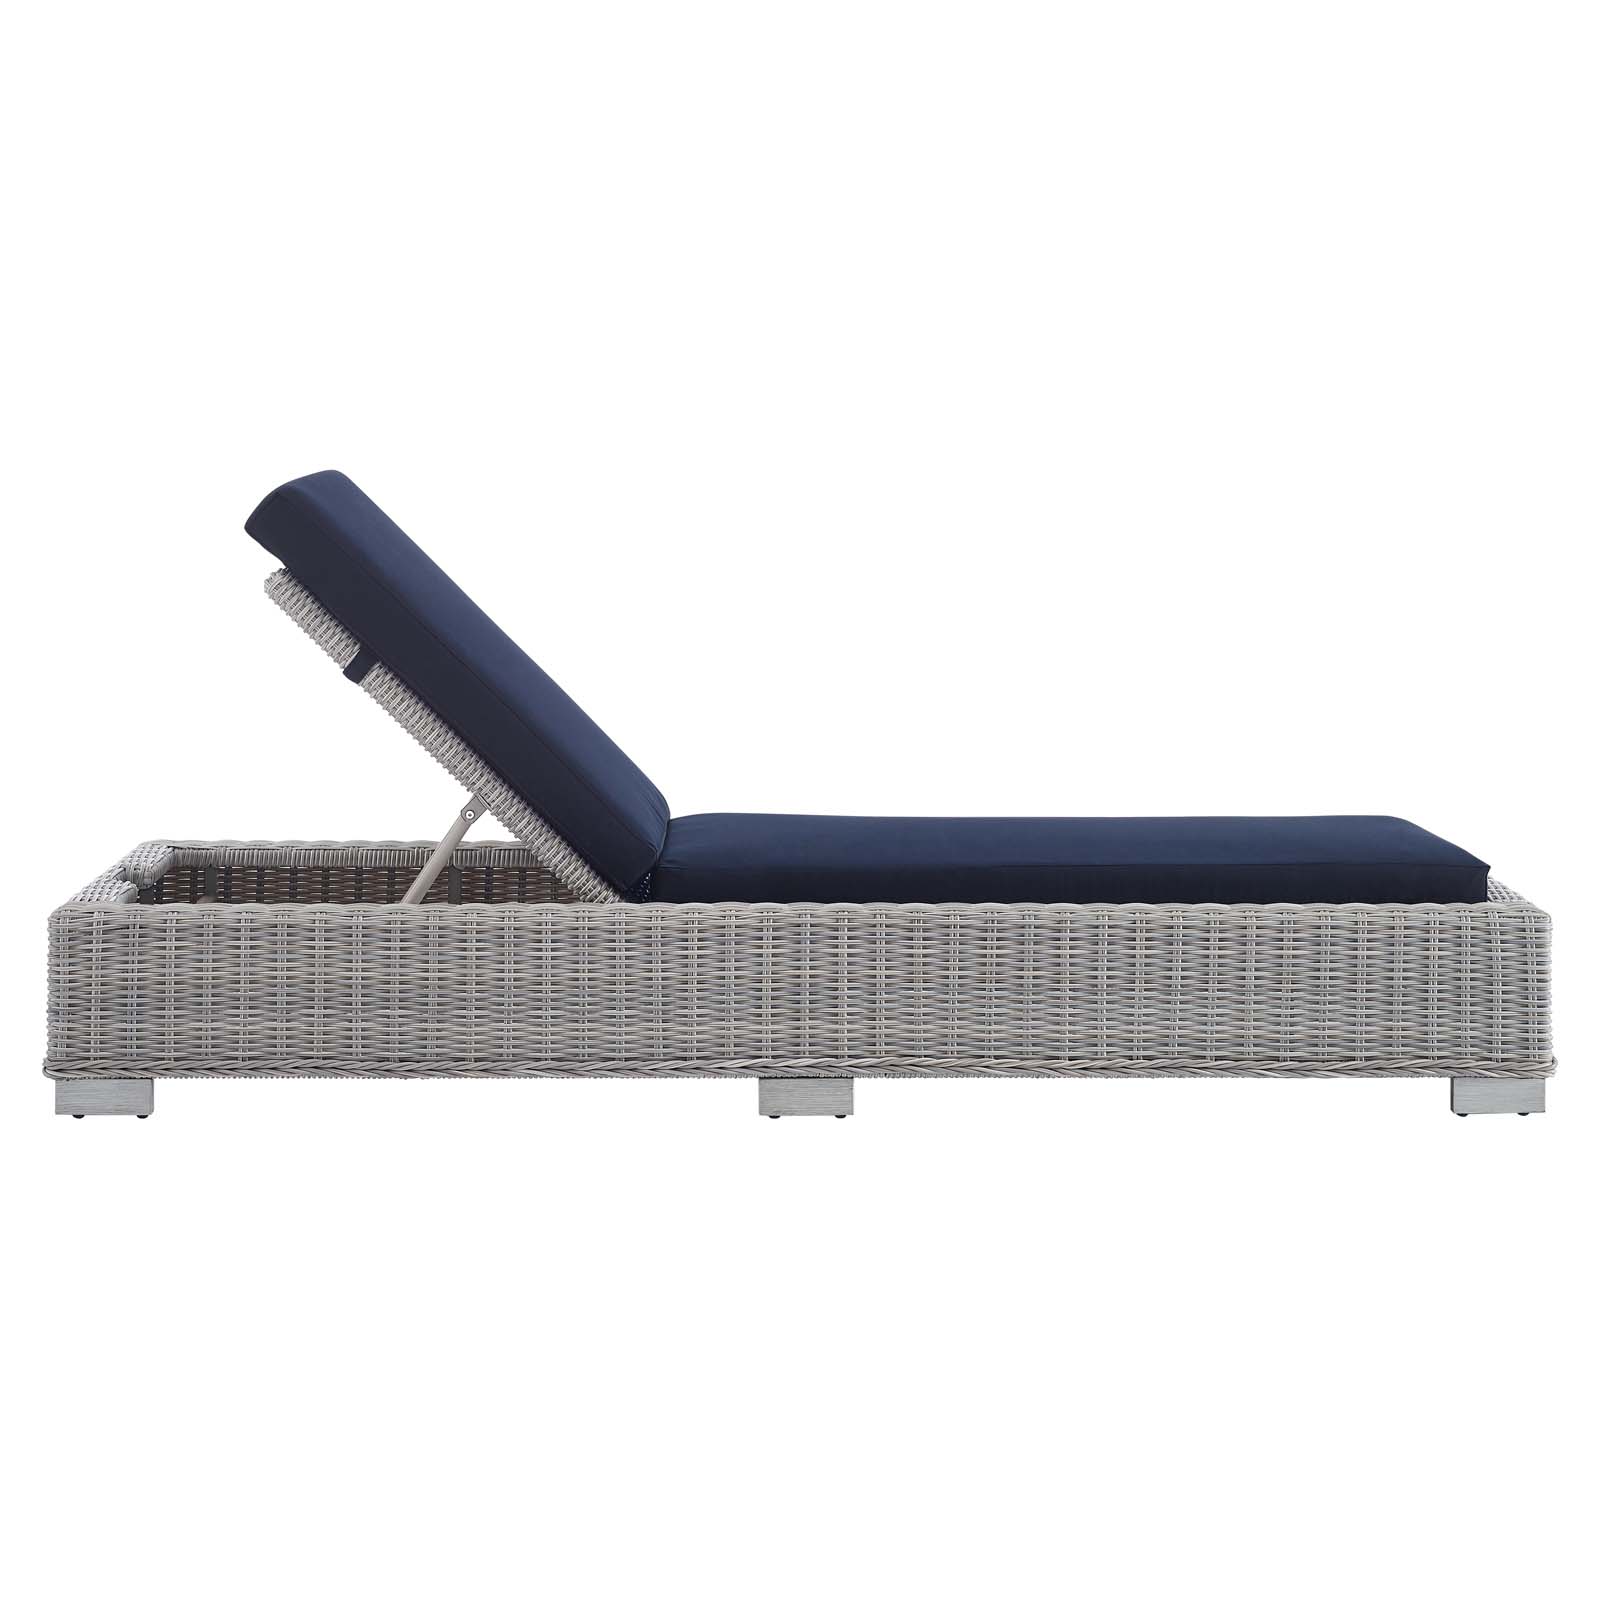 Modway Conway Sunbrella? Outdoor Patio Wicker Rattan Chaise Lounge in Light Gray Navy - image 3 of 10